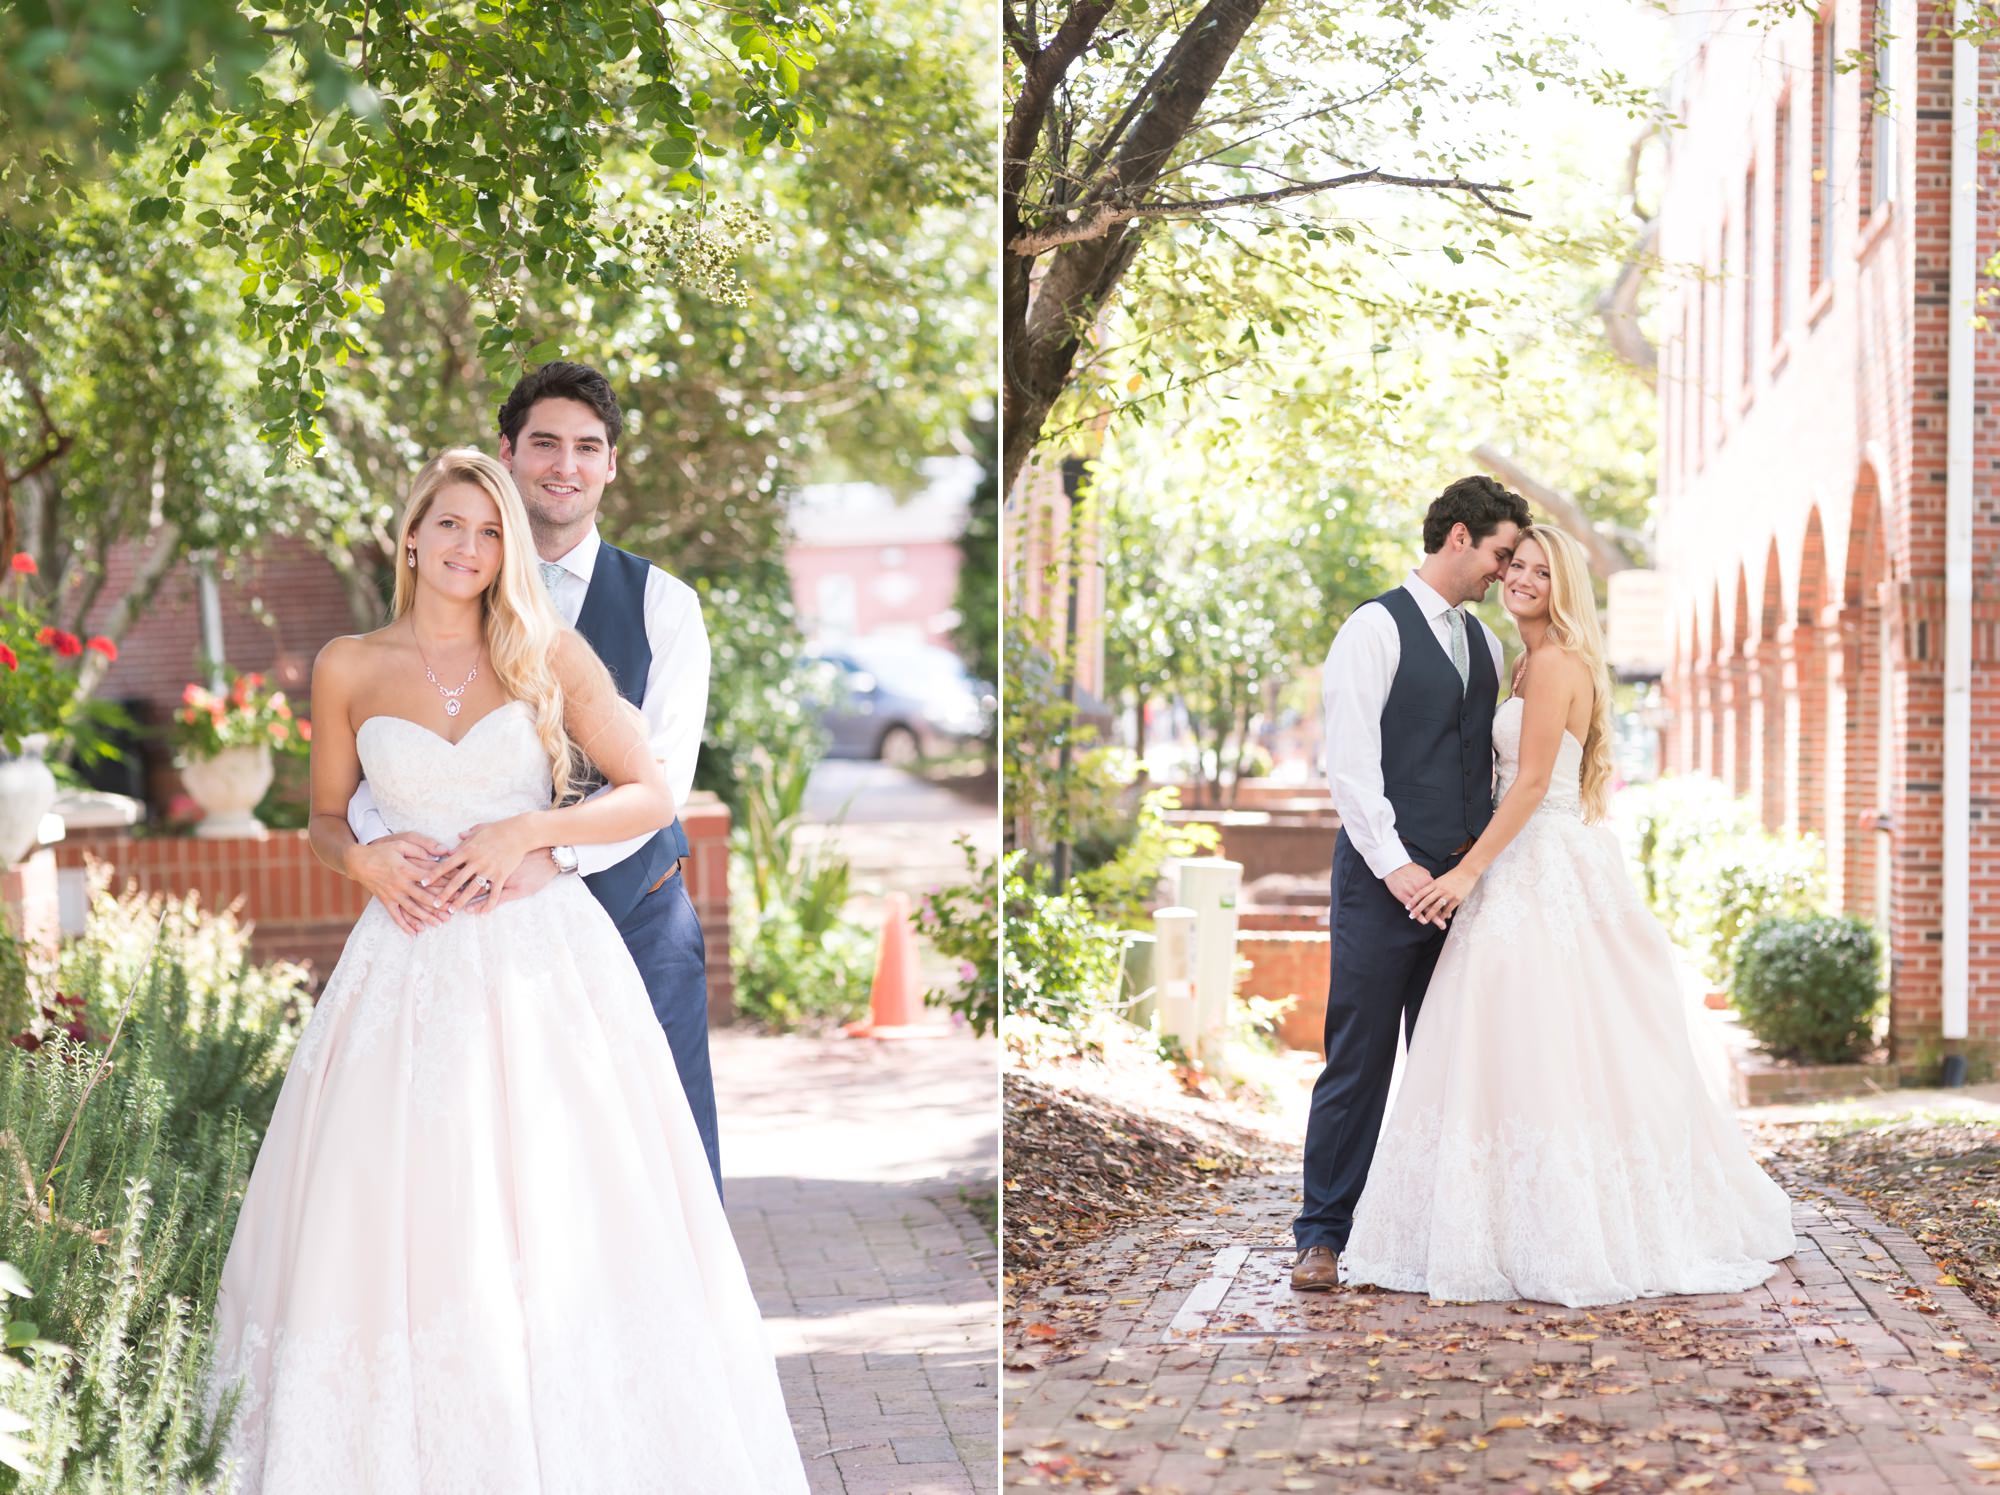 Kelly + Mike | Day After Wedding Session | Anna Wisjo Photography